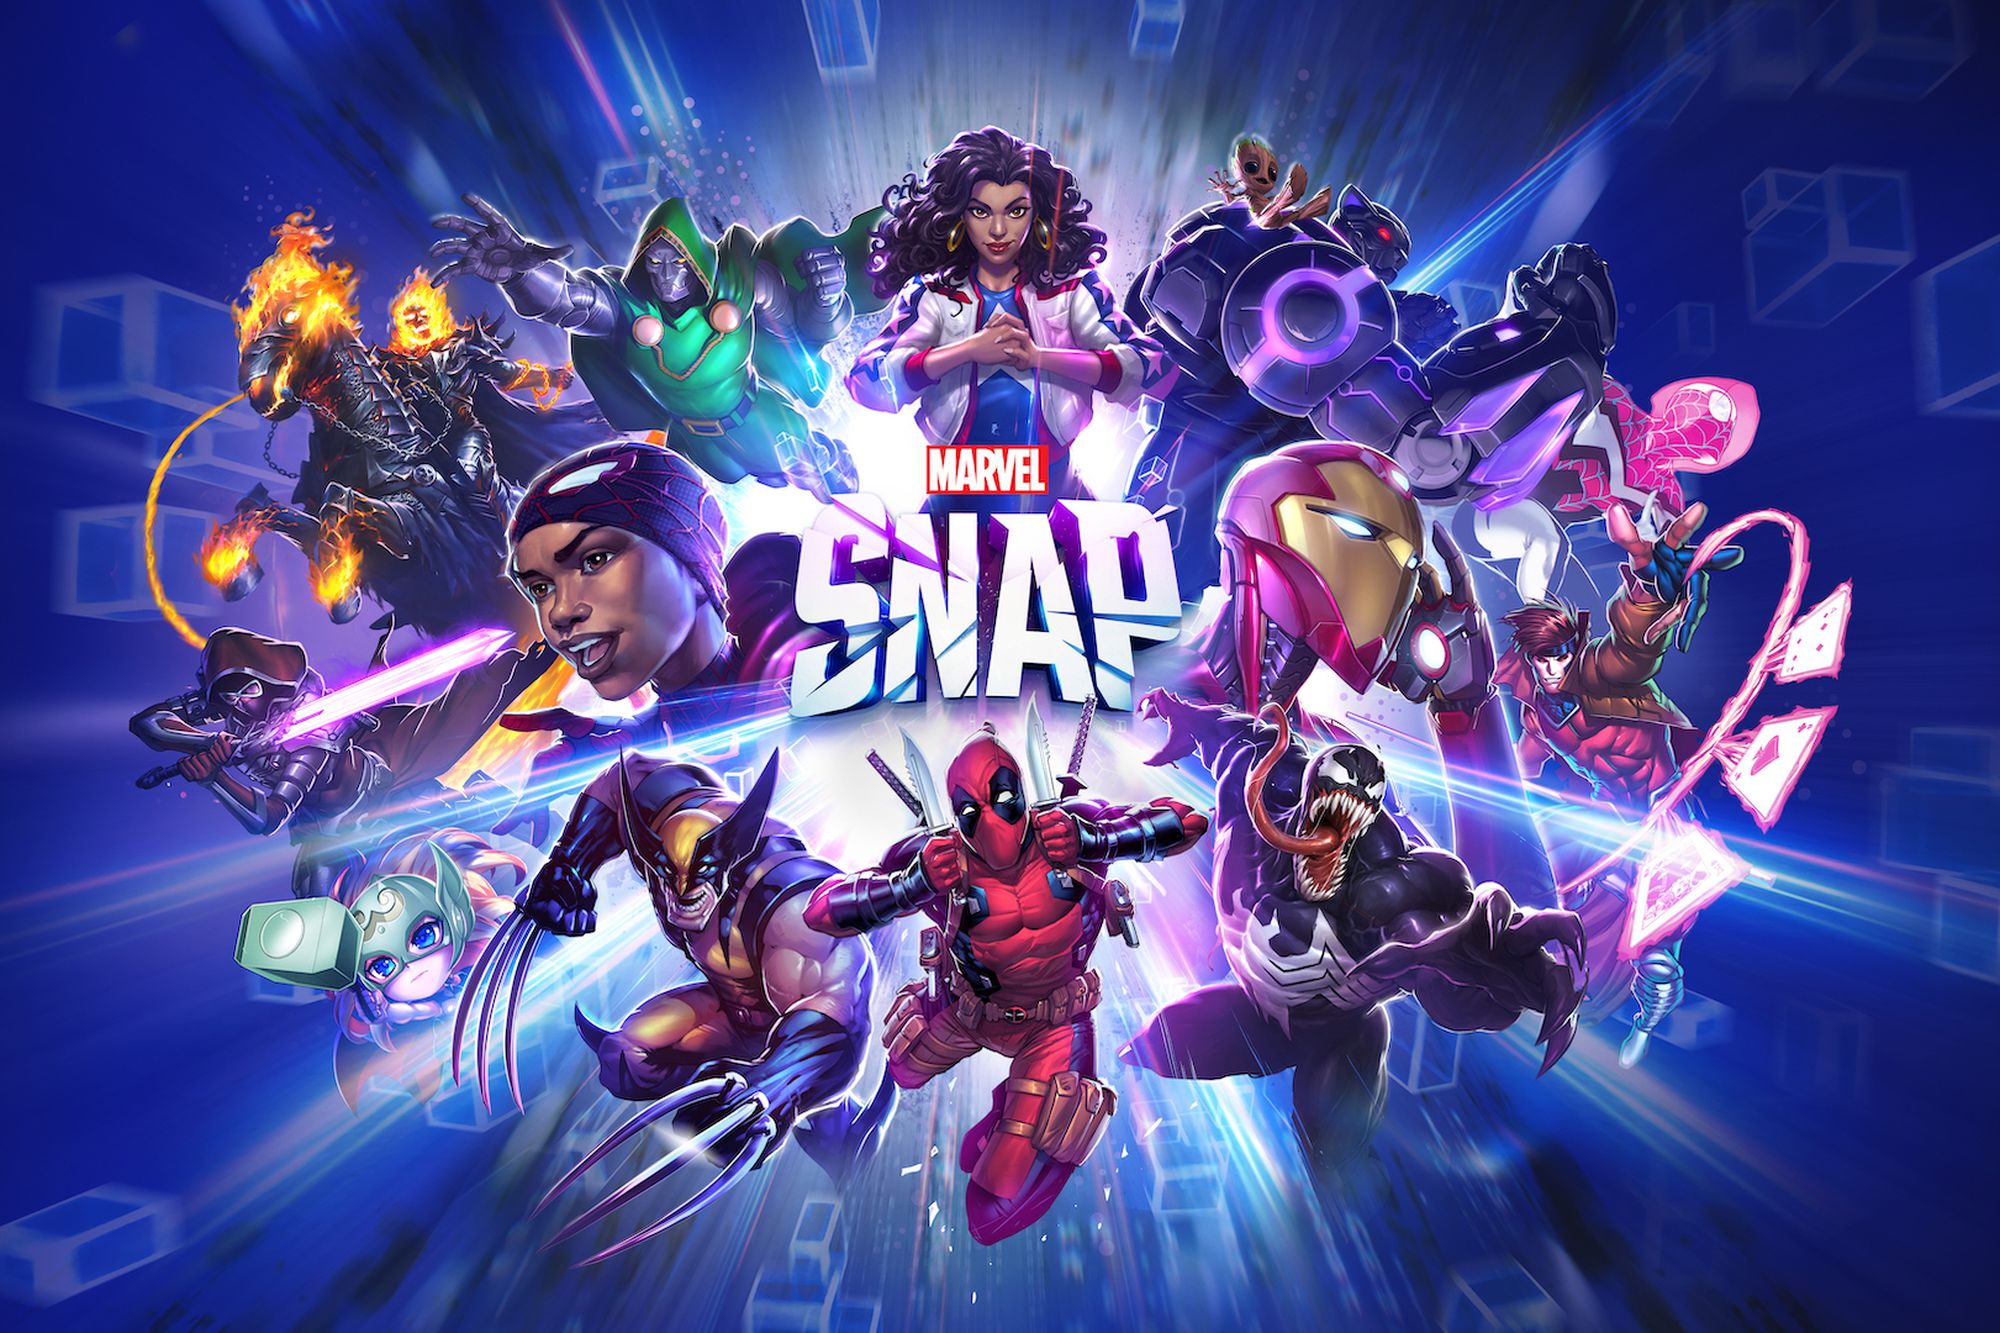 ‘Marvel Snap’ Review: “A Fun Game For Strategy Card Game Enthusiasts”